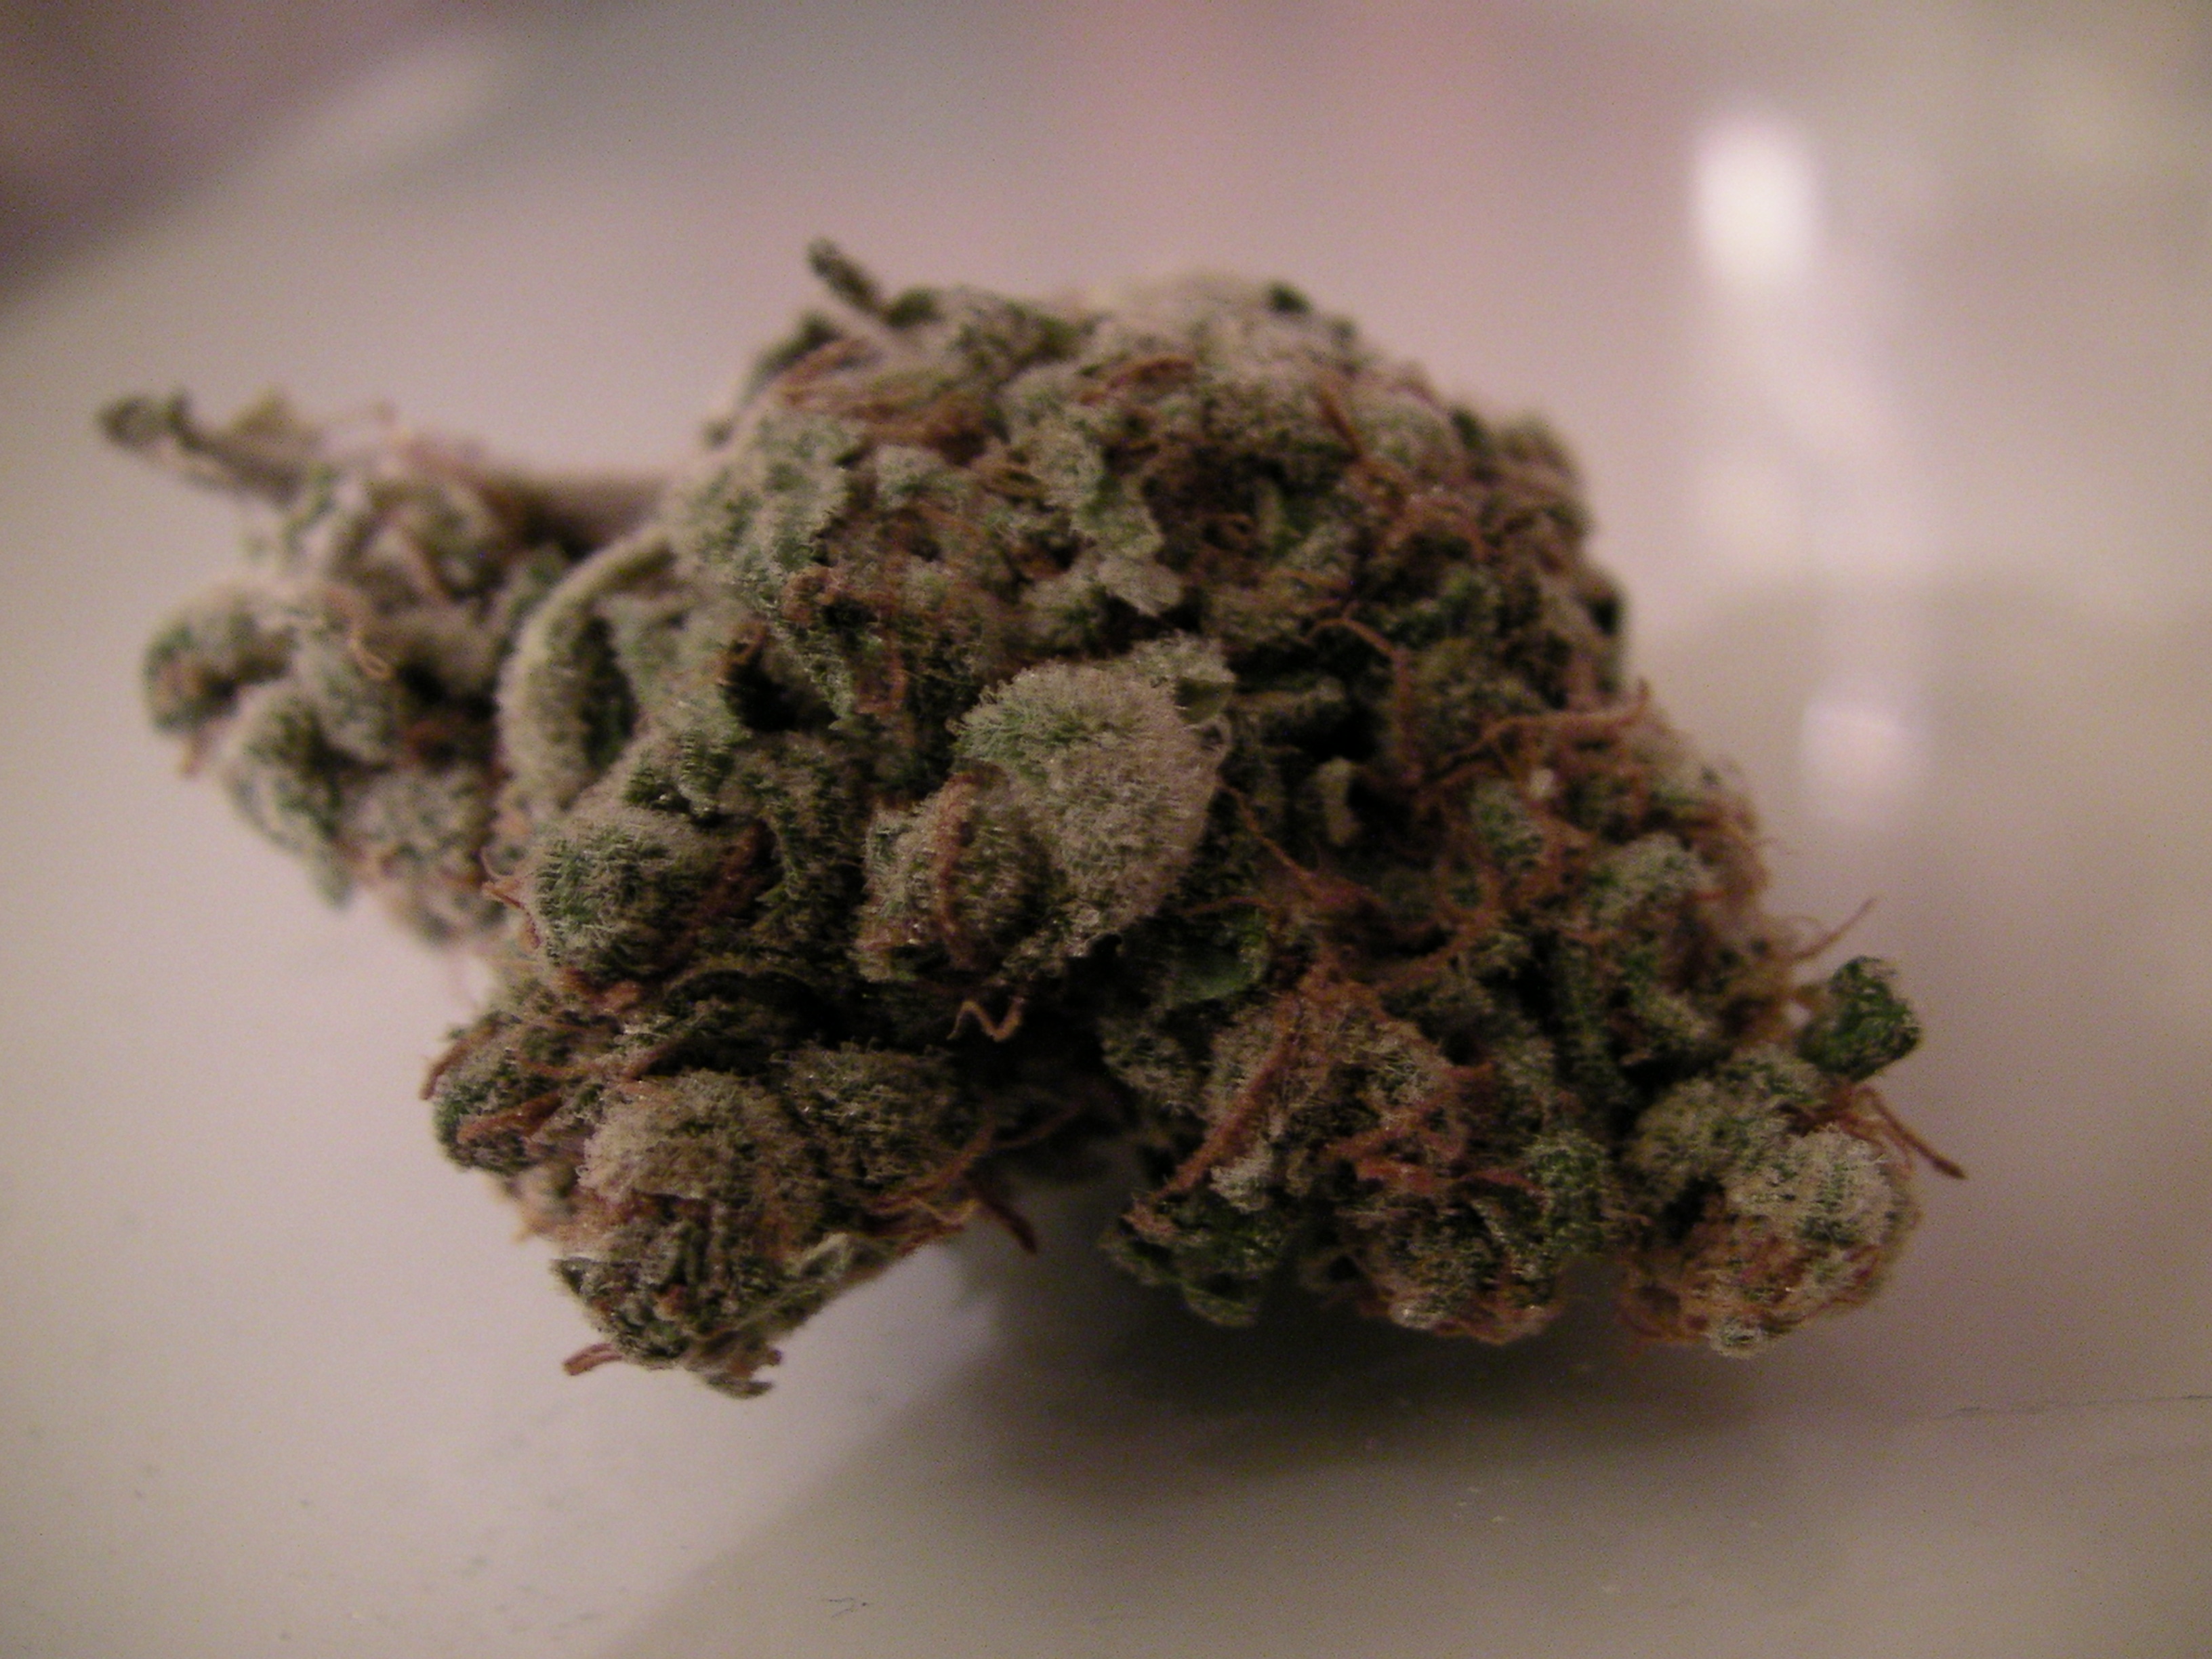 AK47 from The Greenhouse – Amsterdam Weed Review UNCUT